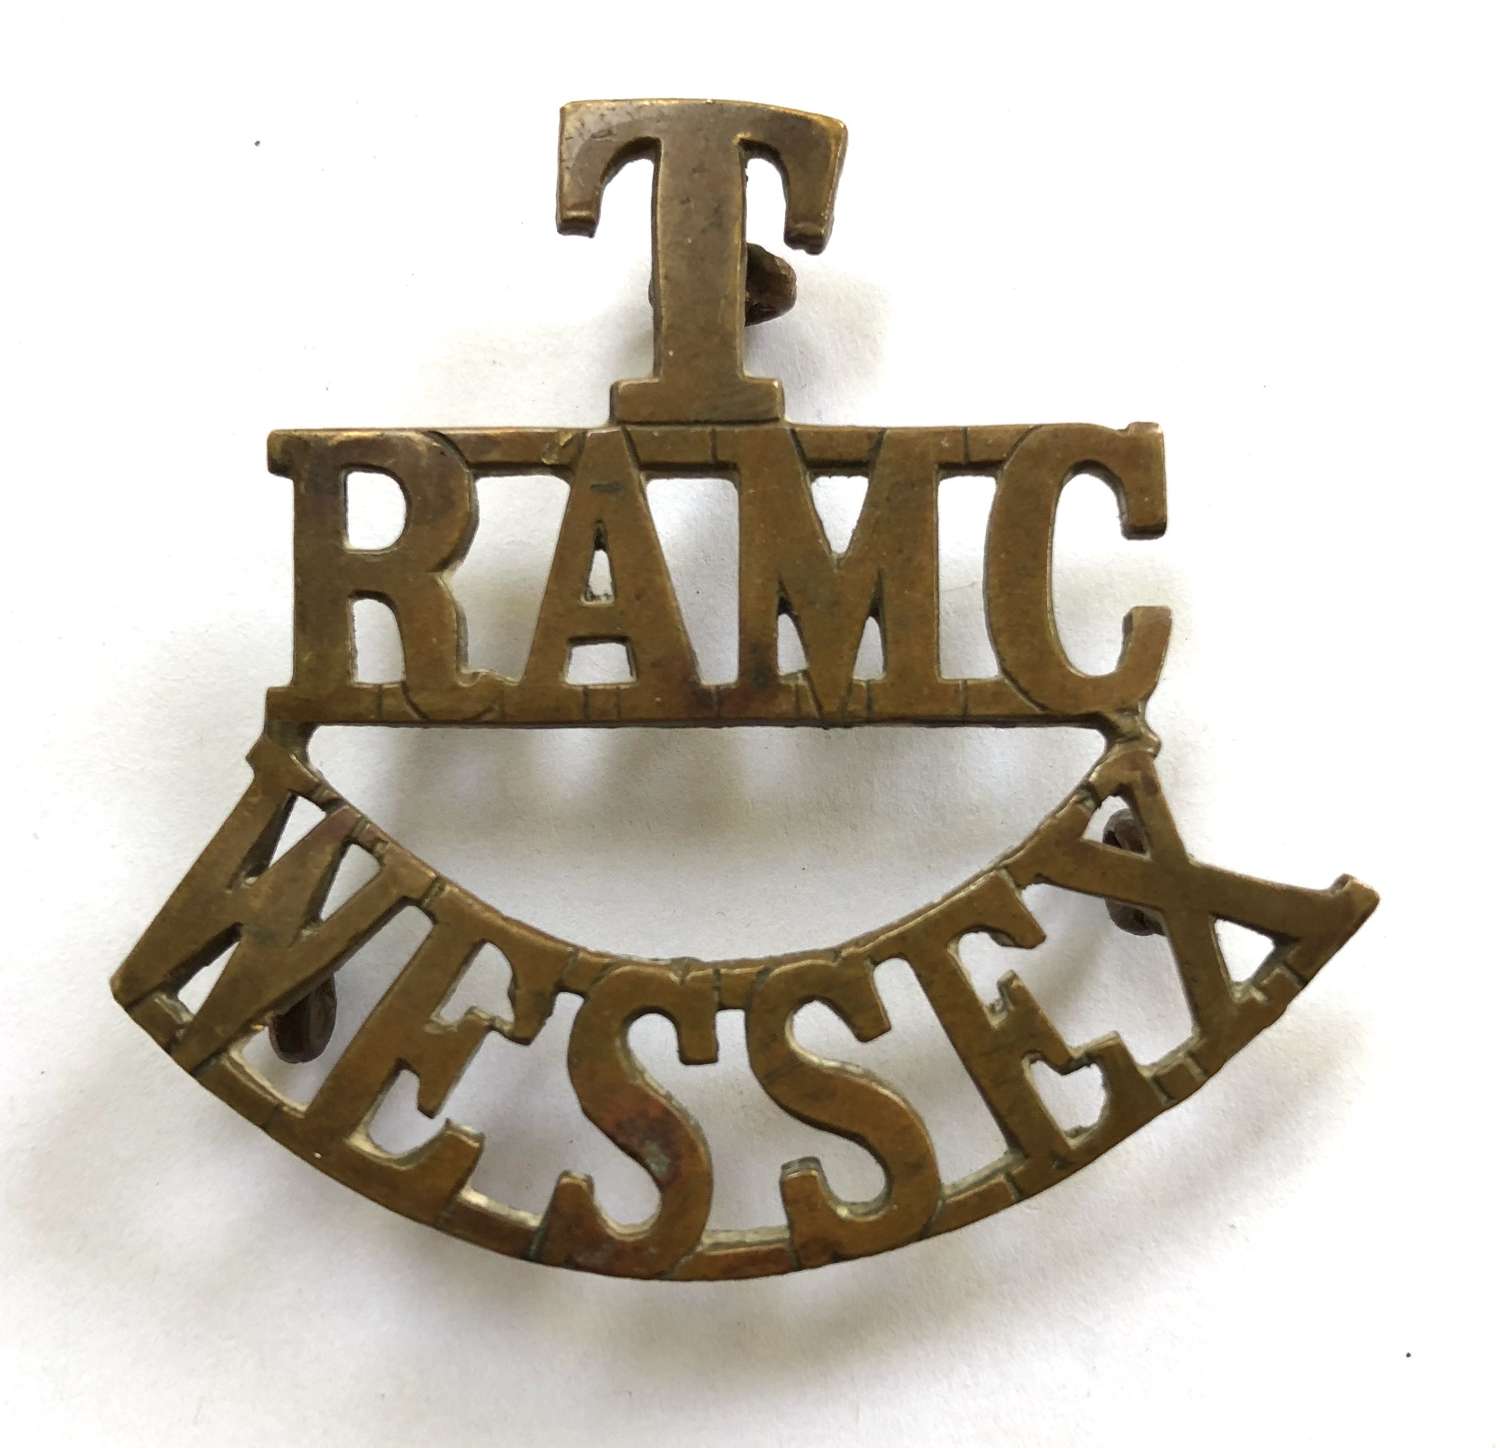 T / RAMC / WESSEX Casualty Clearing Station shoulder title c1908-21